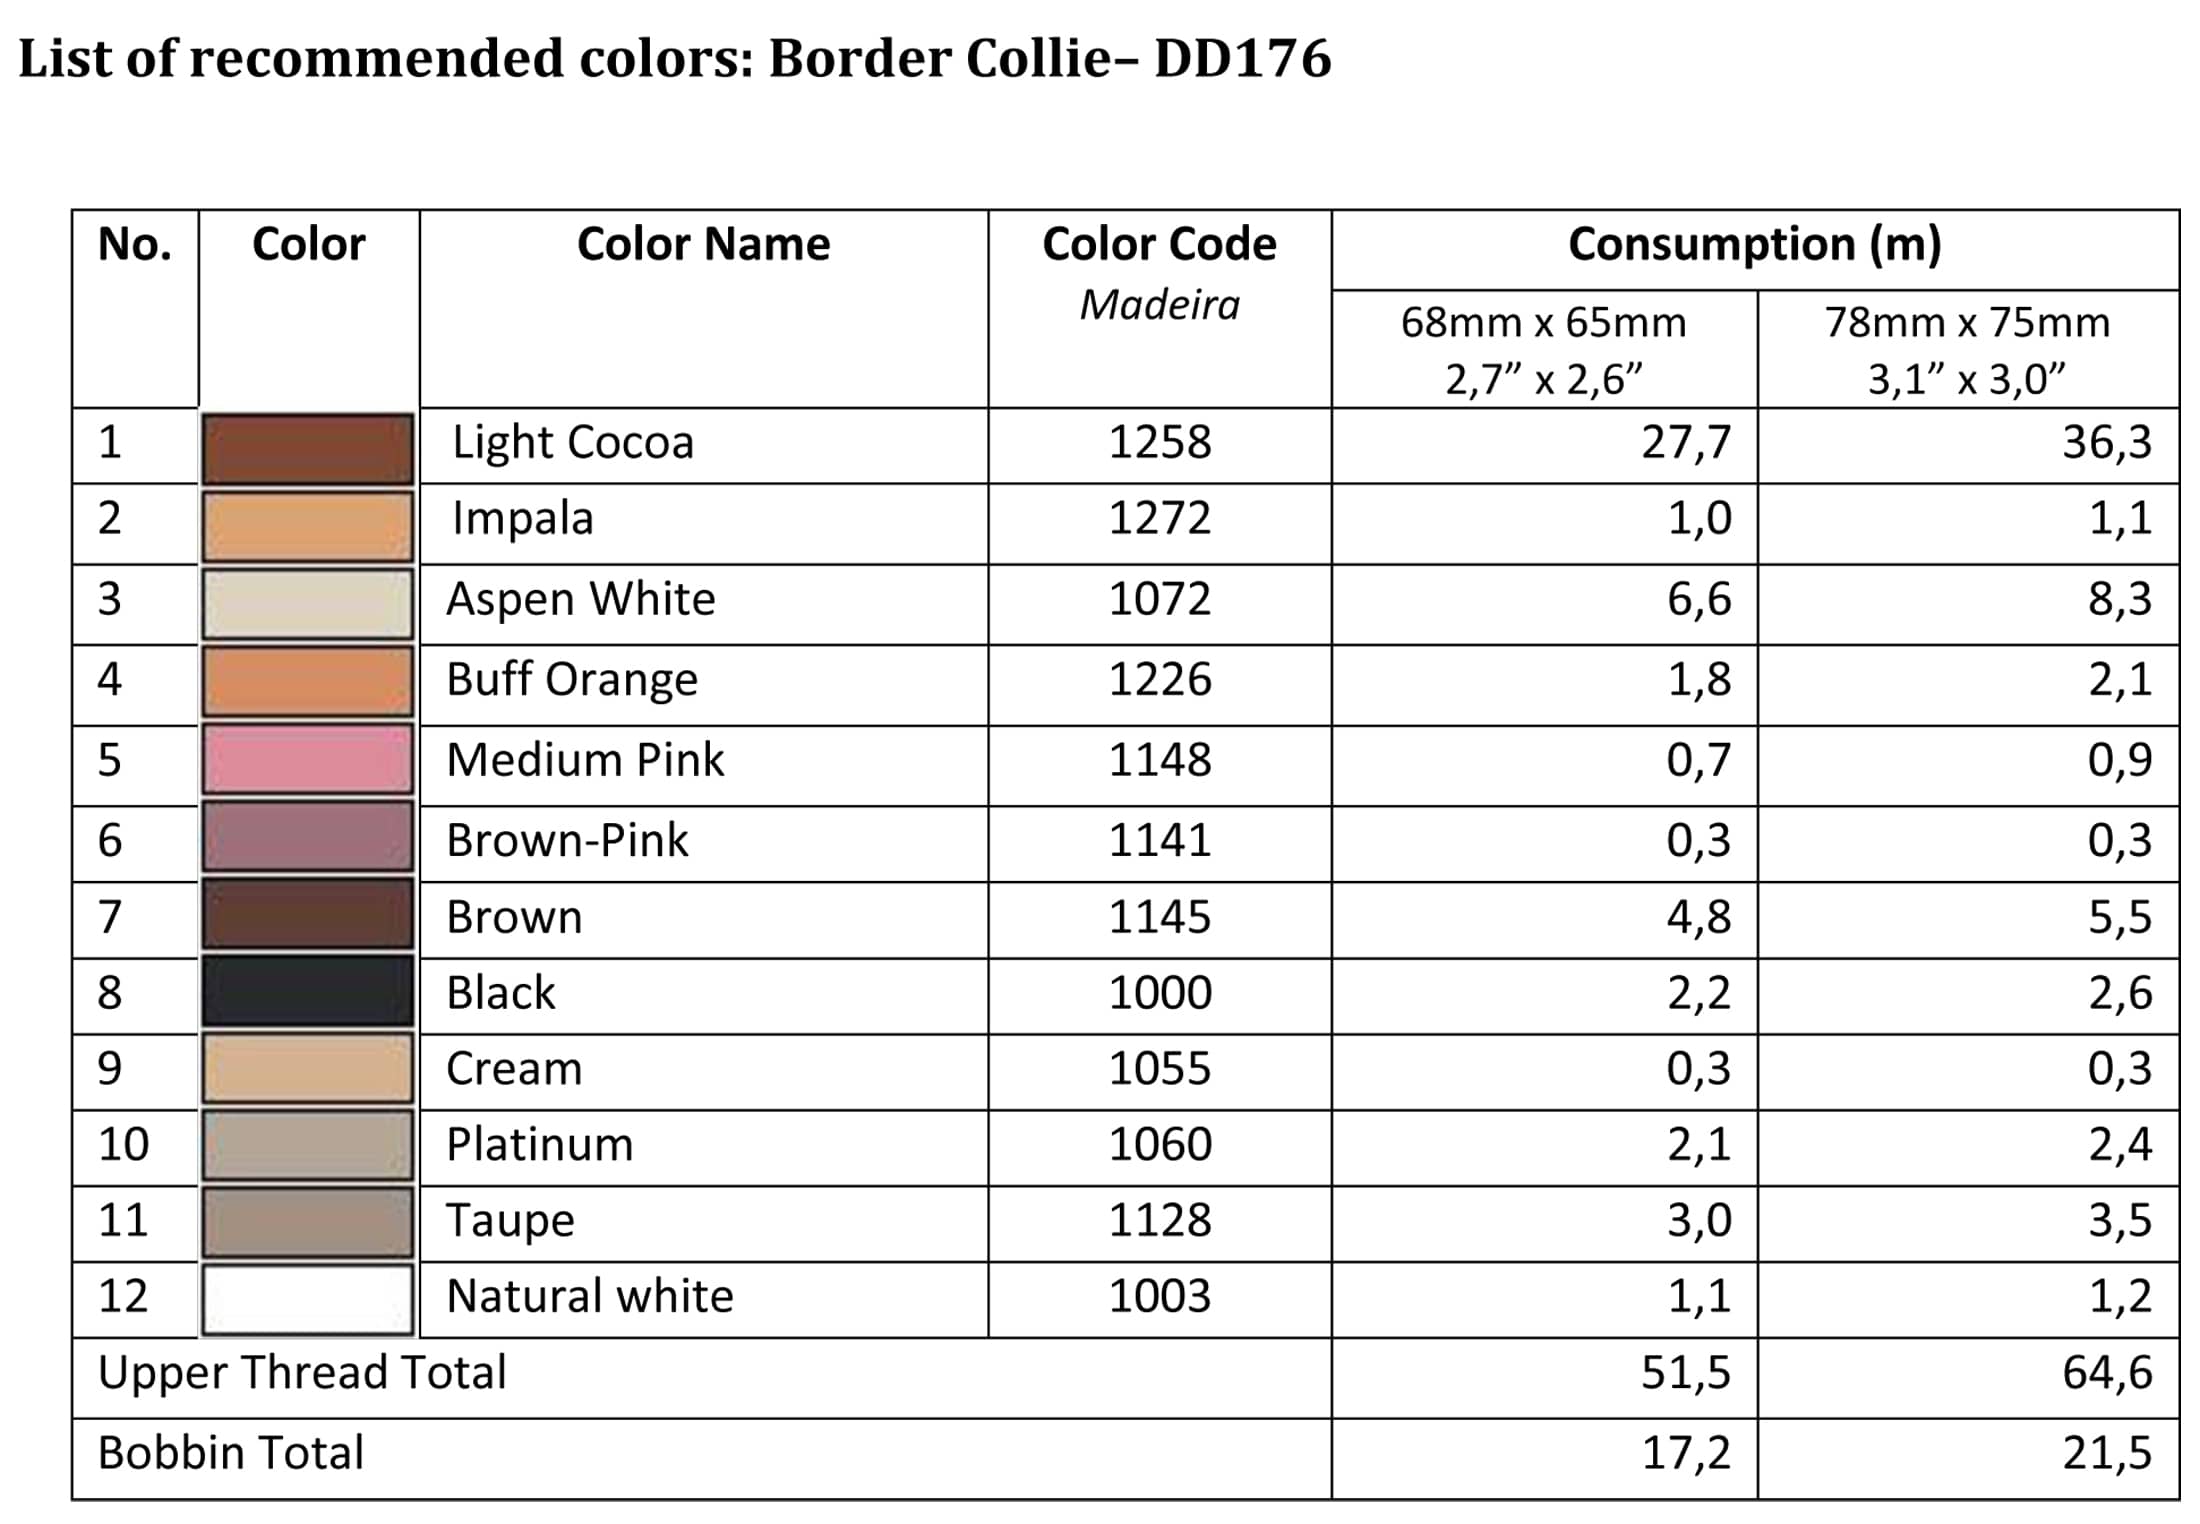 List of recommended colors - DD176